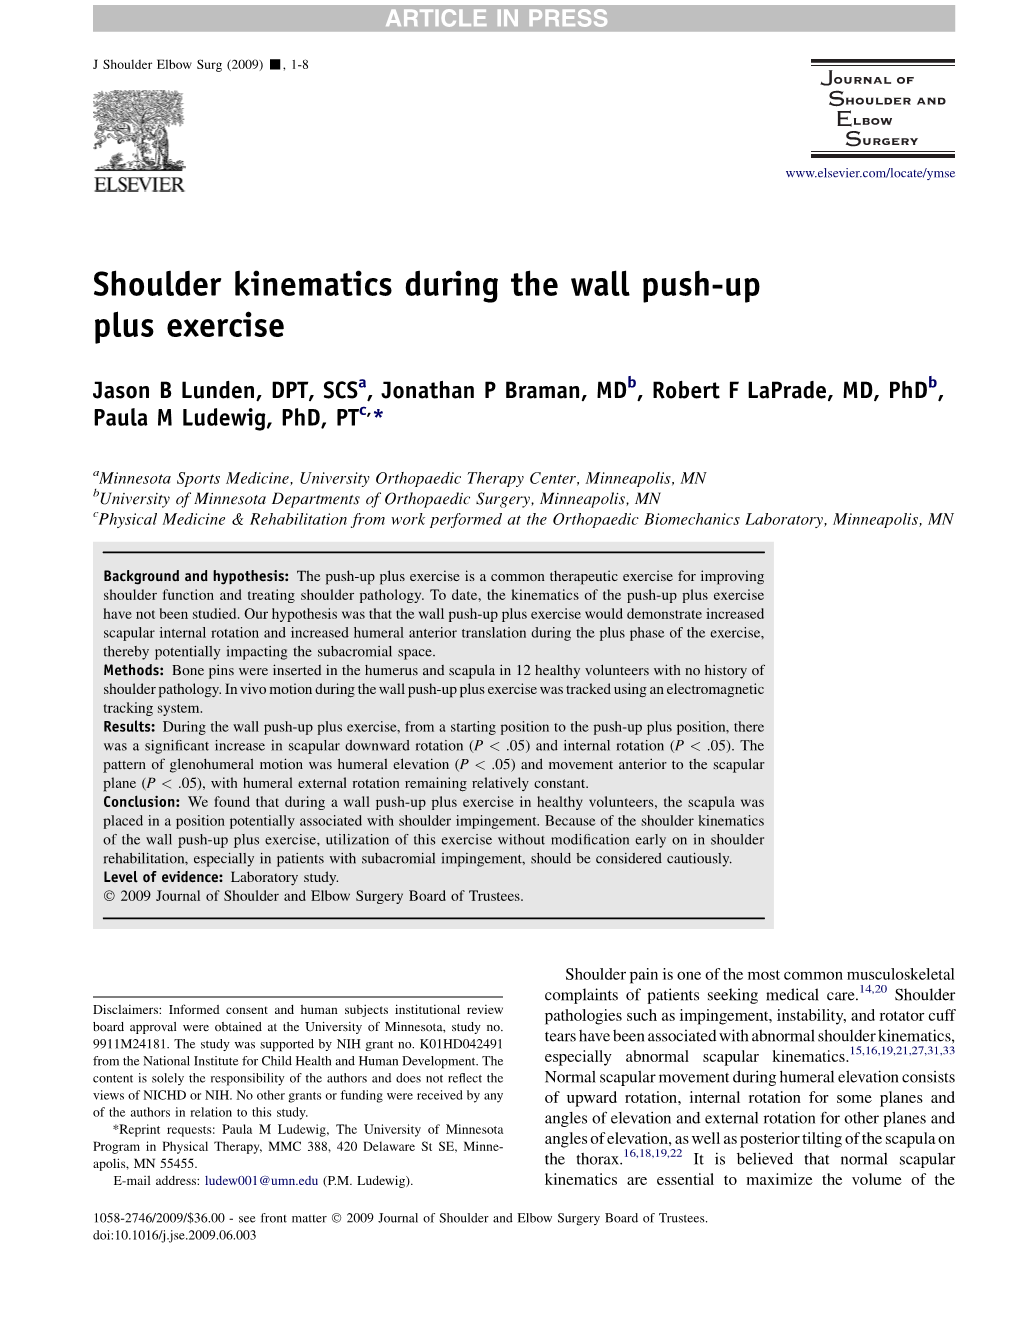 Shoulder Kinematics During the Wall Push-Up Plus Exercise